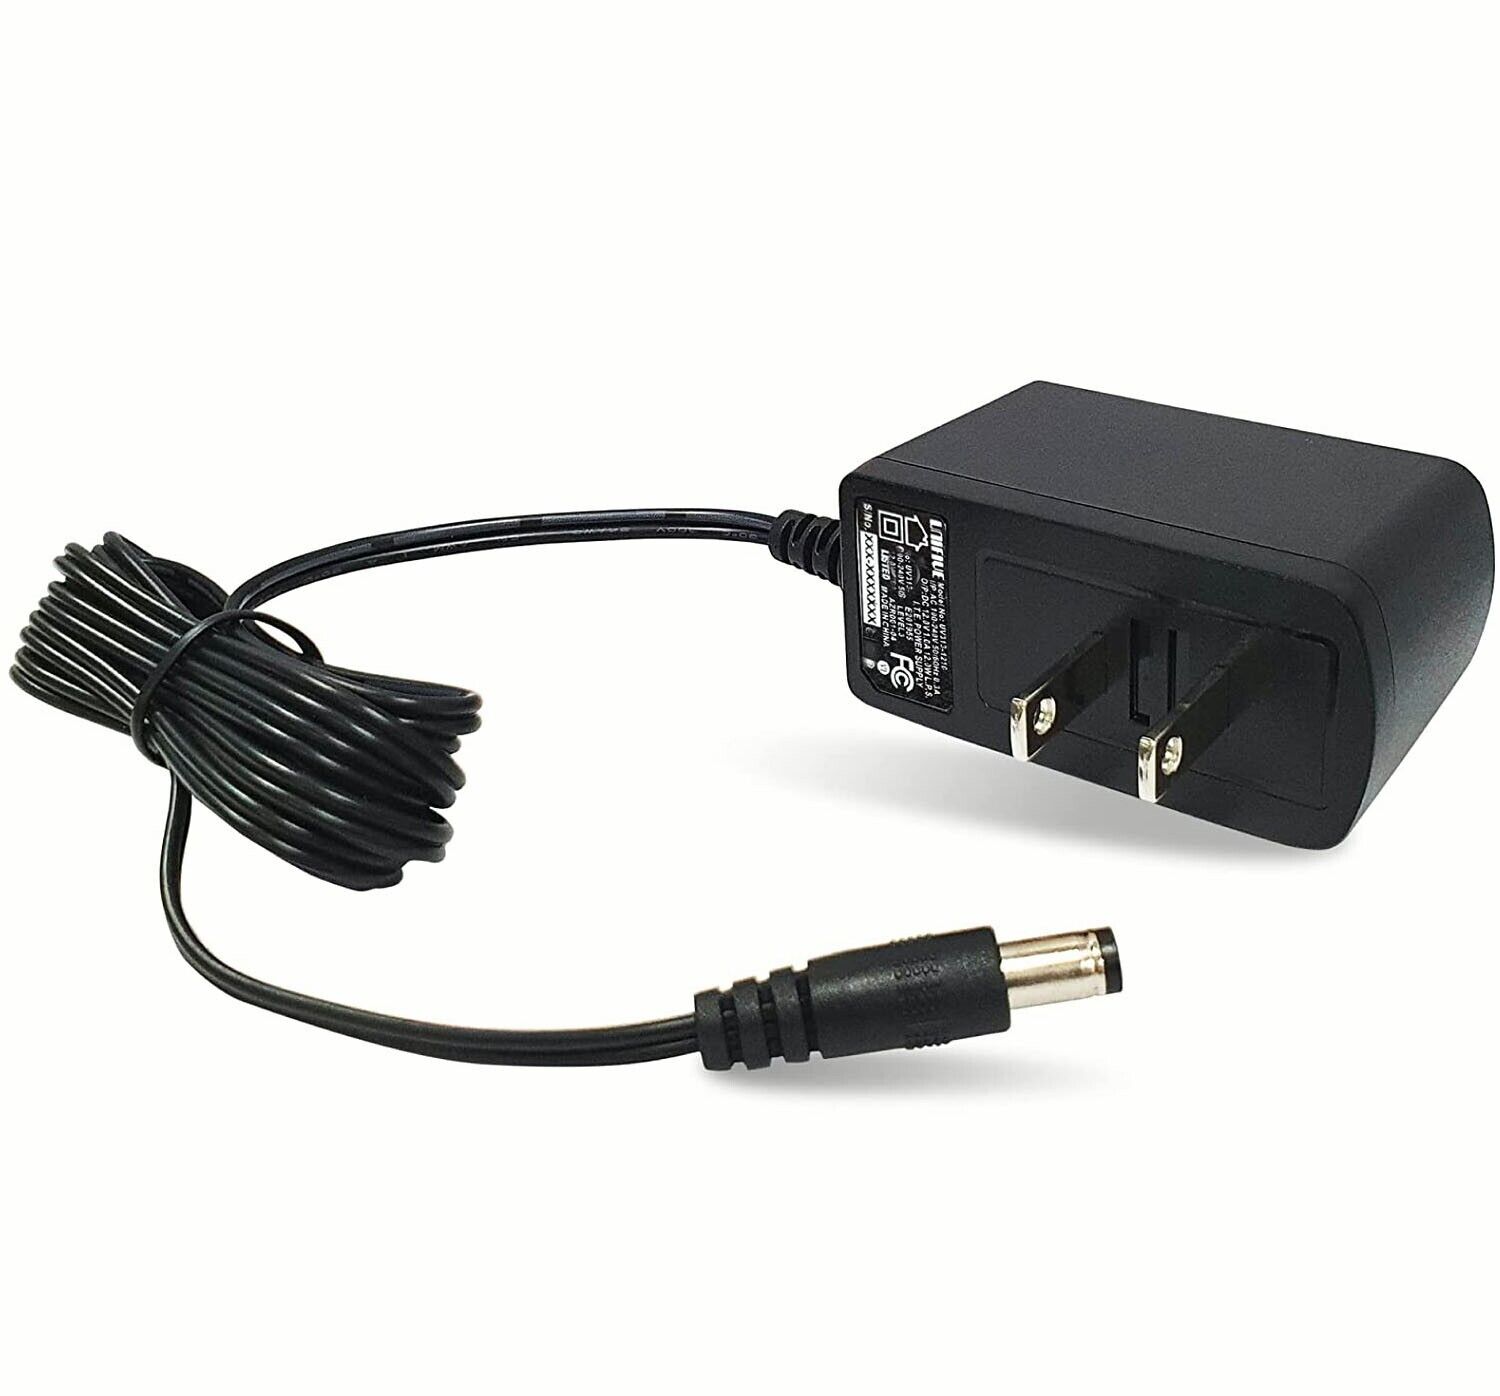 NEW Premium AC/DC Power Supply Adapter Charger Transformer 100% compatible with the various OTC scanners listed in the t